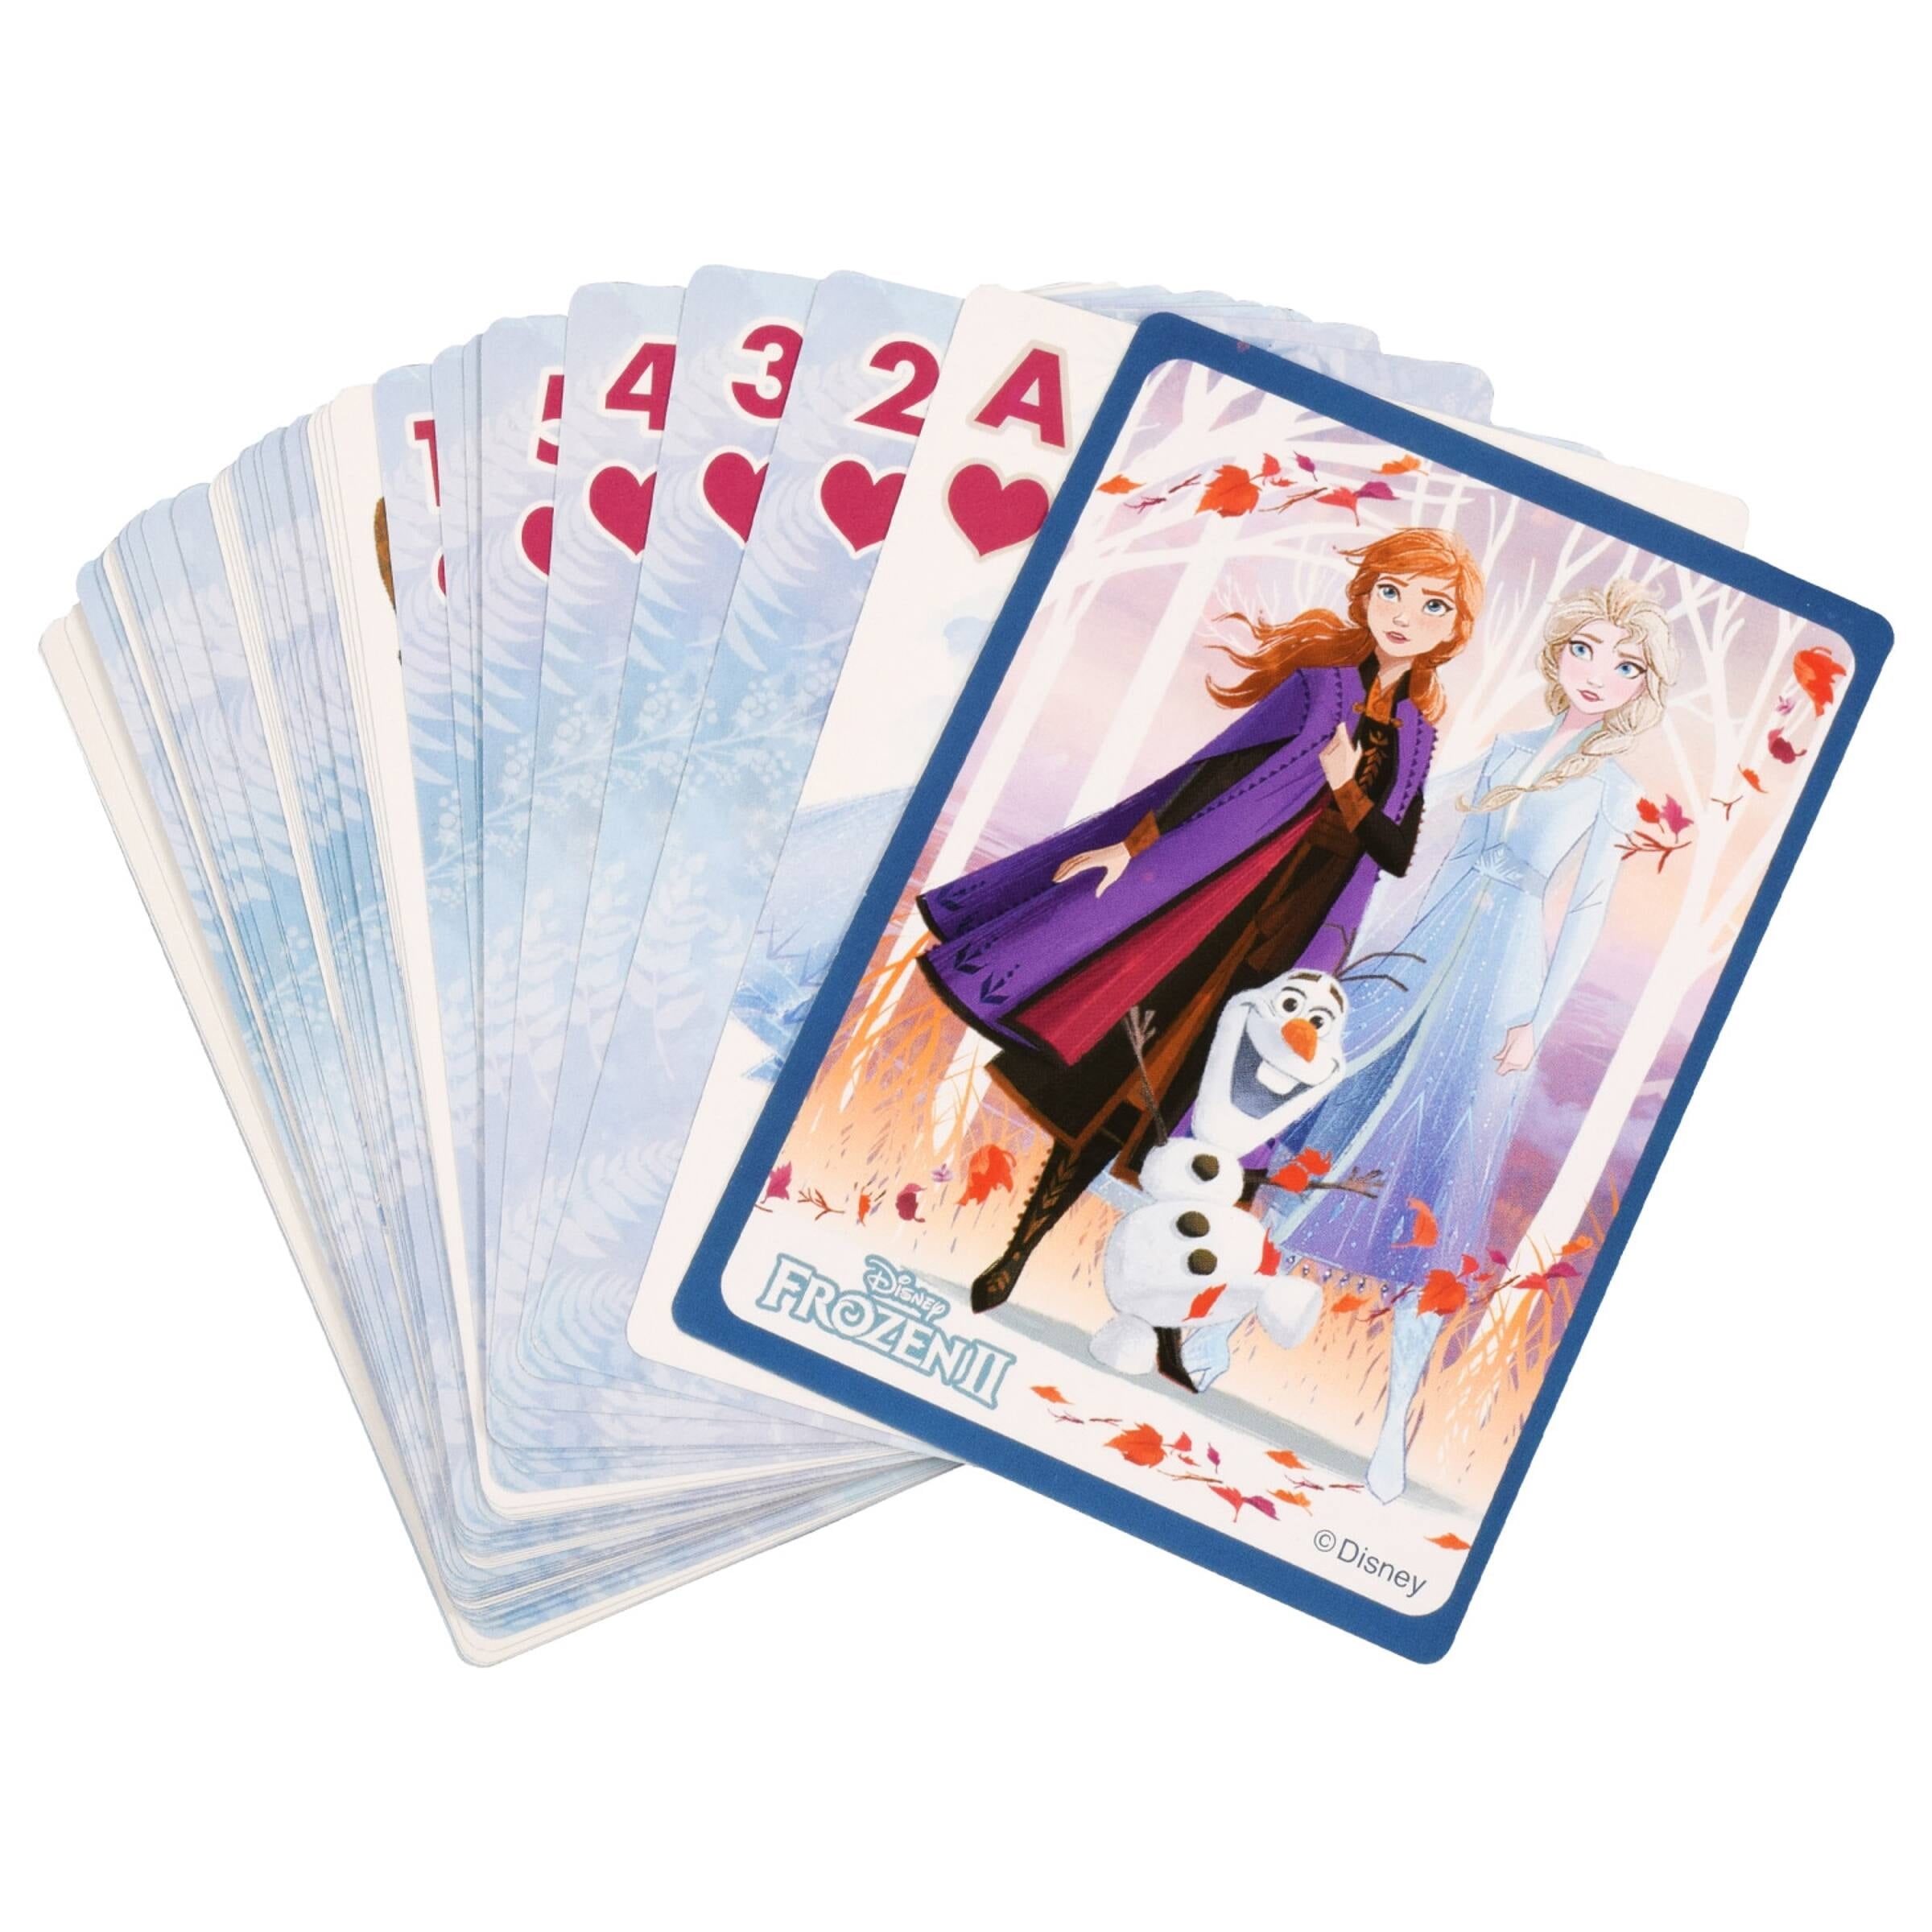 Disney Frozen 2 Jumbo Playing Cards - 1 Deck Featuring Elsa Anna Olaf Sven  and Kristoff